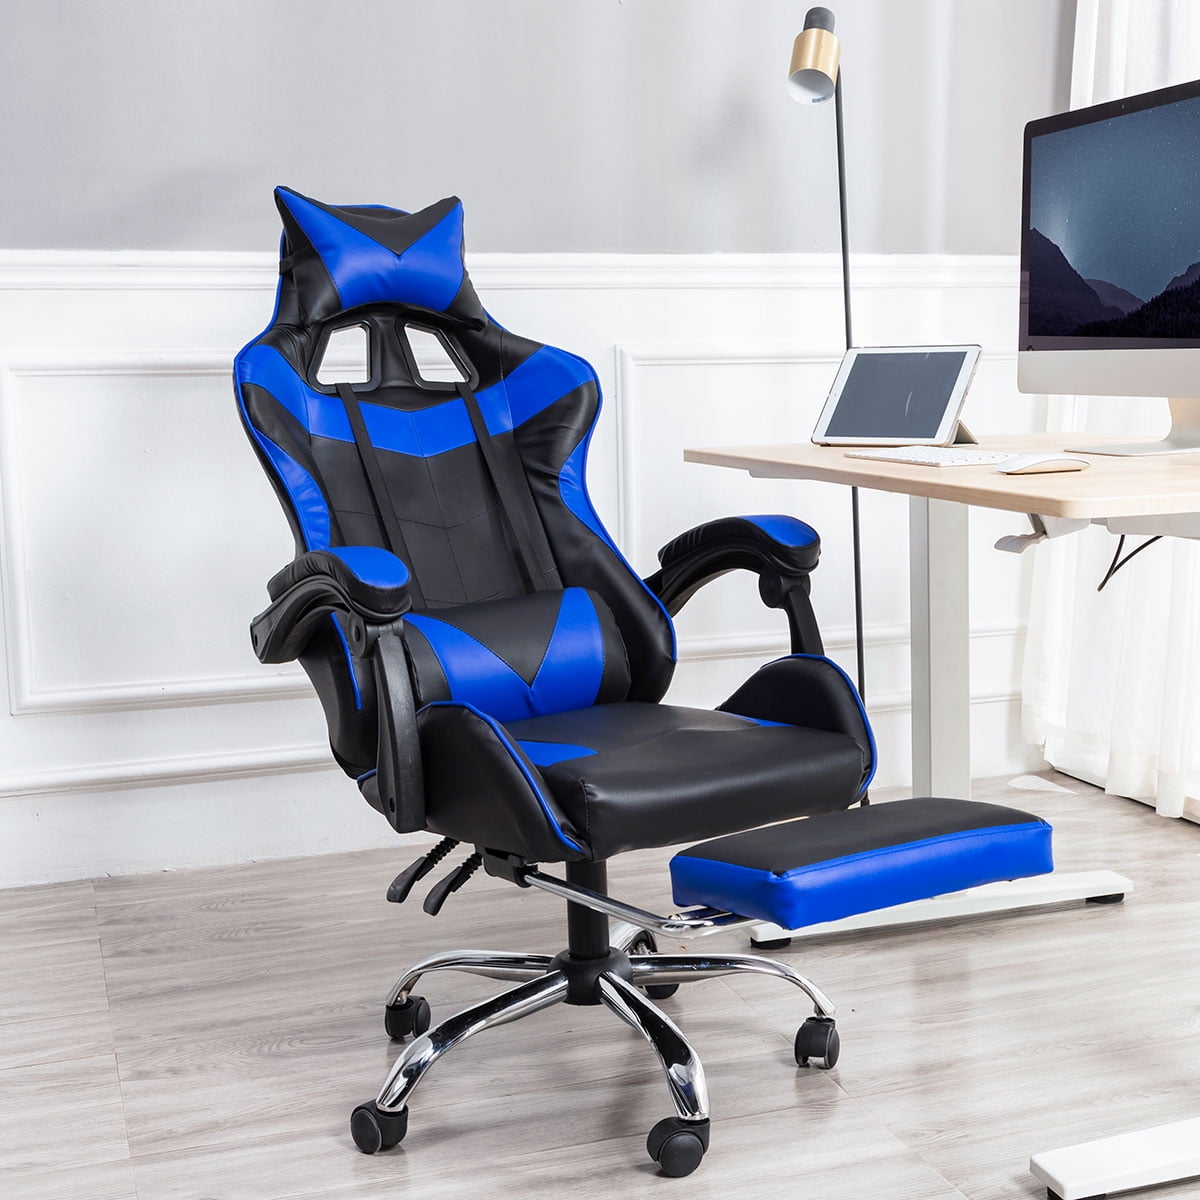 Racing Gaming Chairs Office Executive Lift Swivel Recliner Laptop Computer Chair 